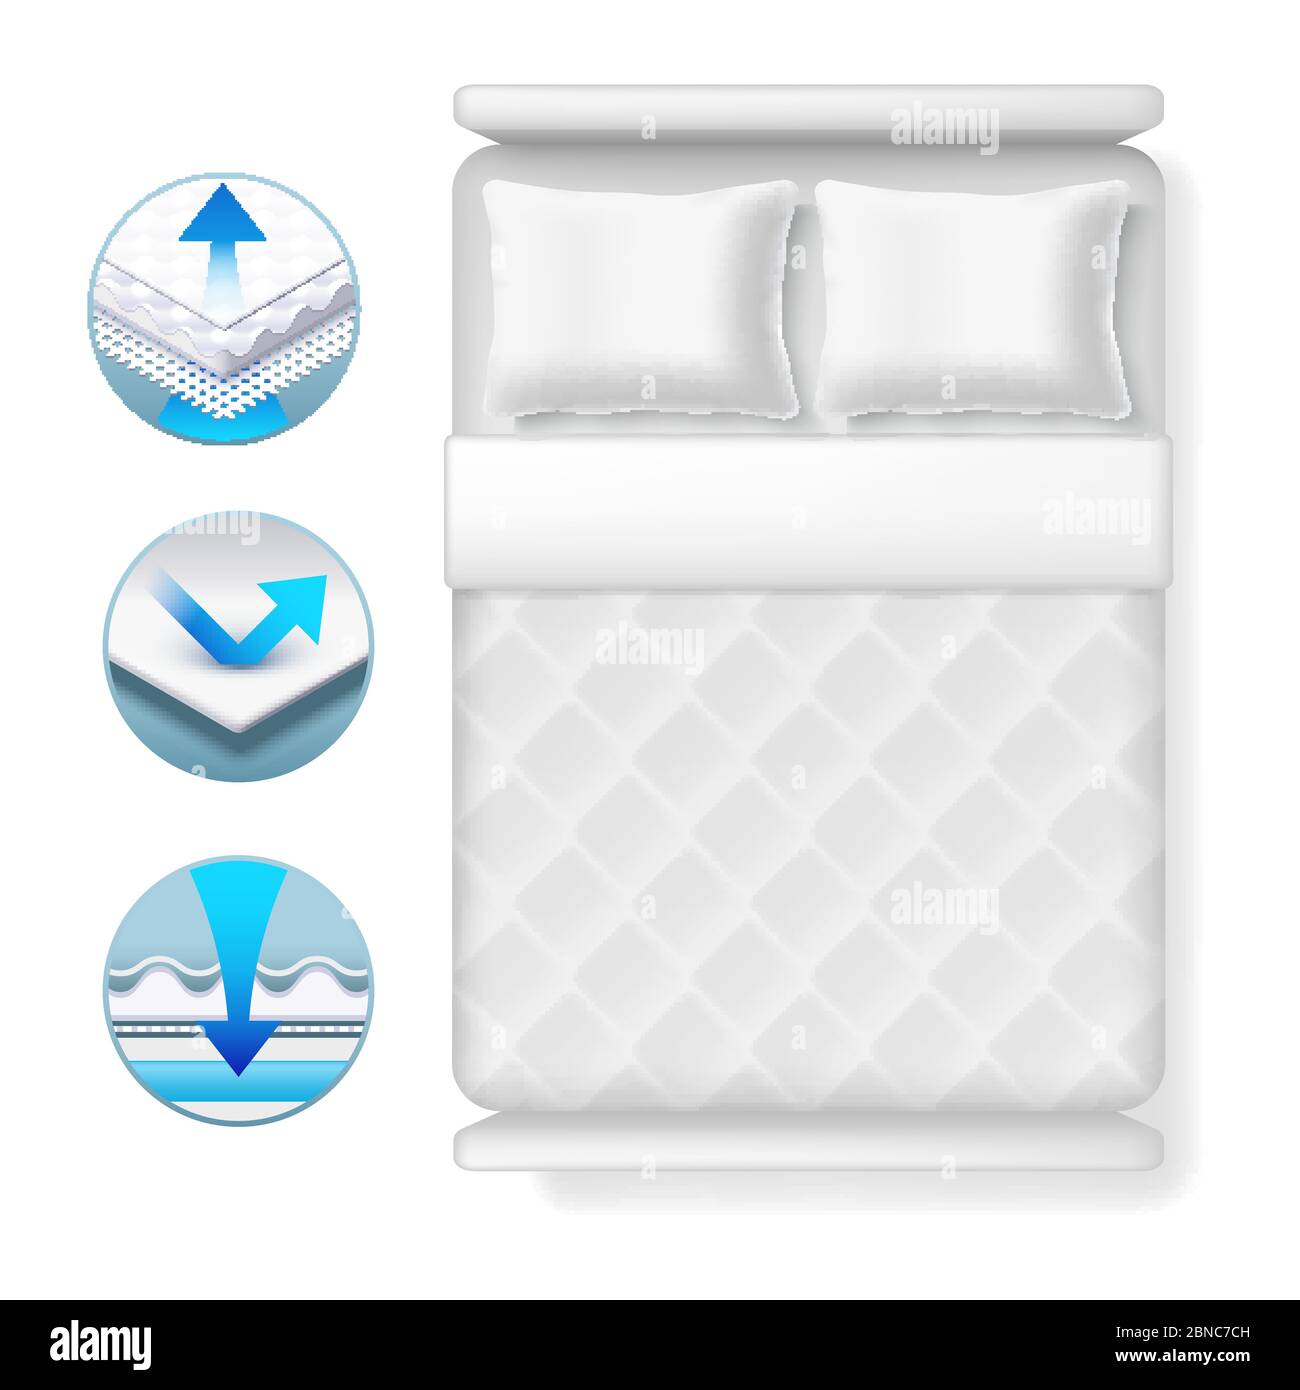 Info icons about bed mattress. Realistic white bed with pillows and blanket isolated on white background. Bed furniture mattress for sleep comfortable illustration Stock Vector